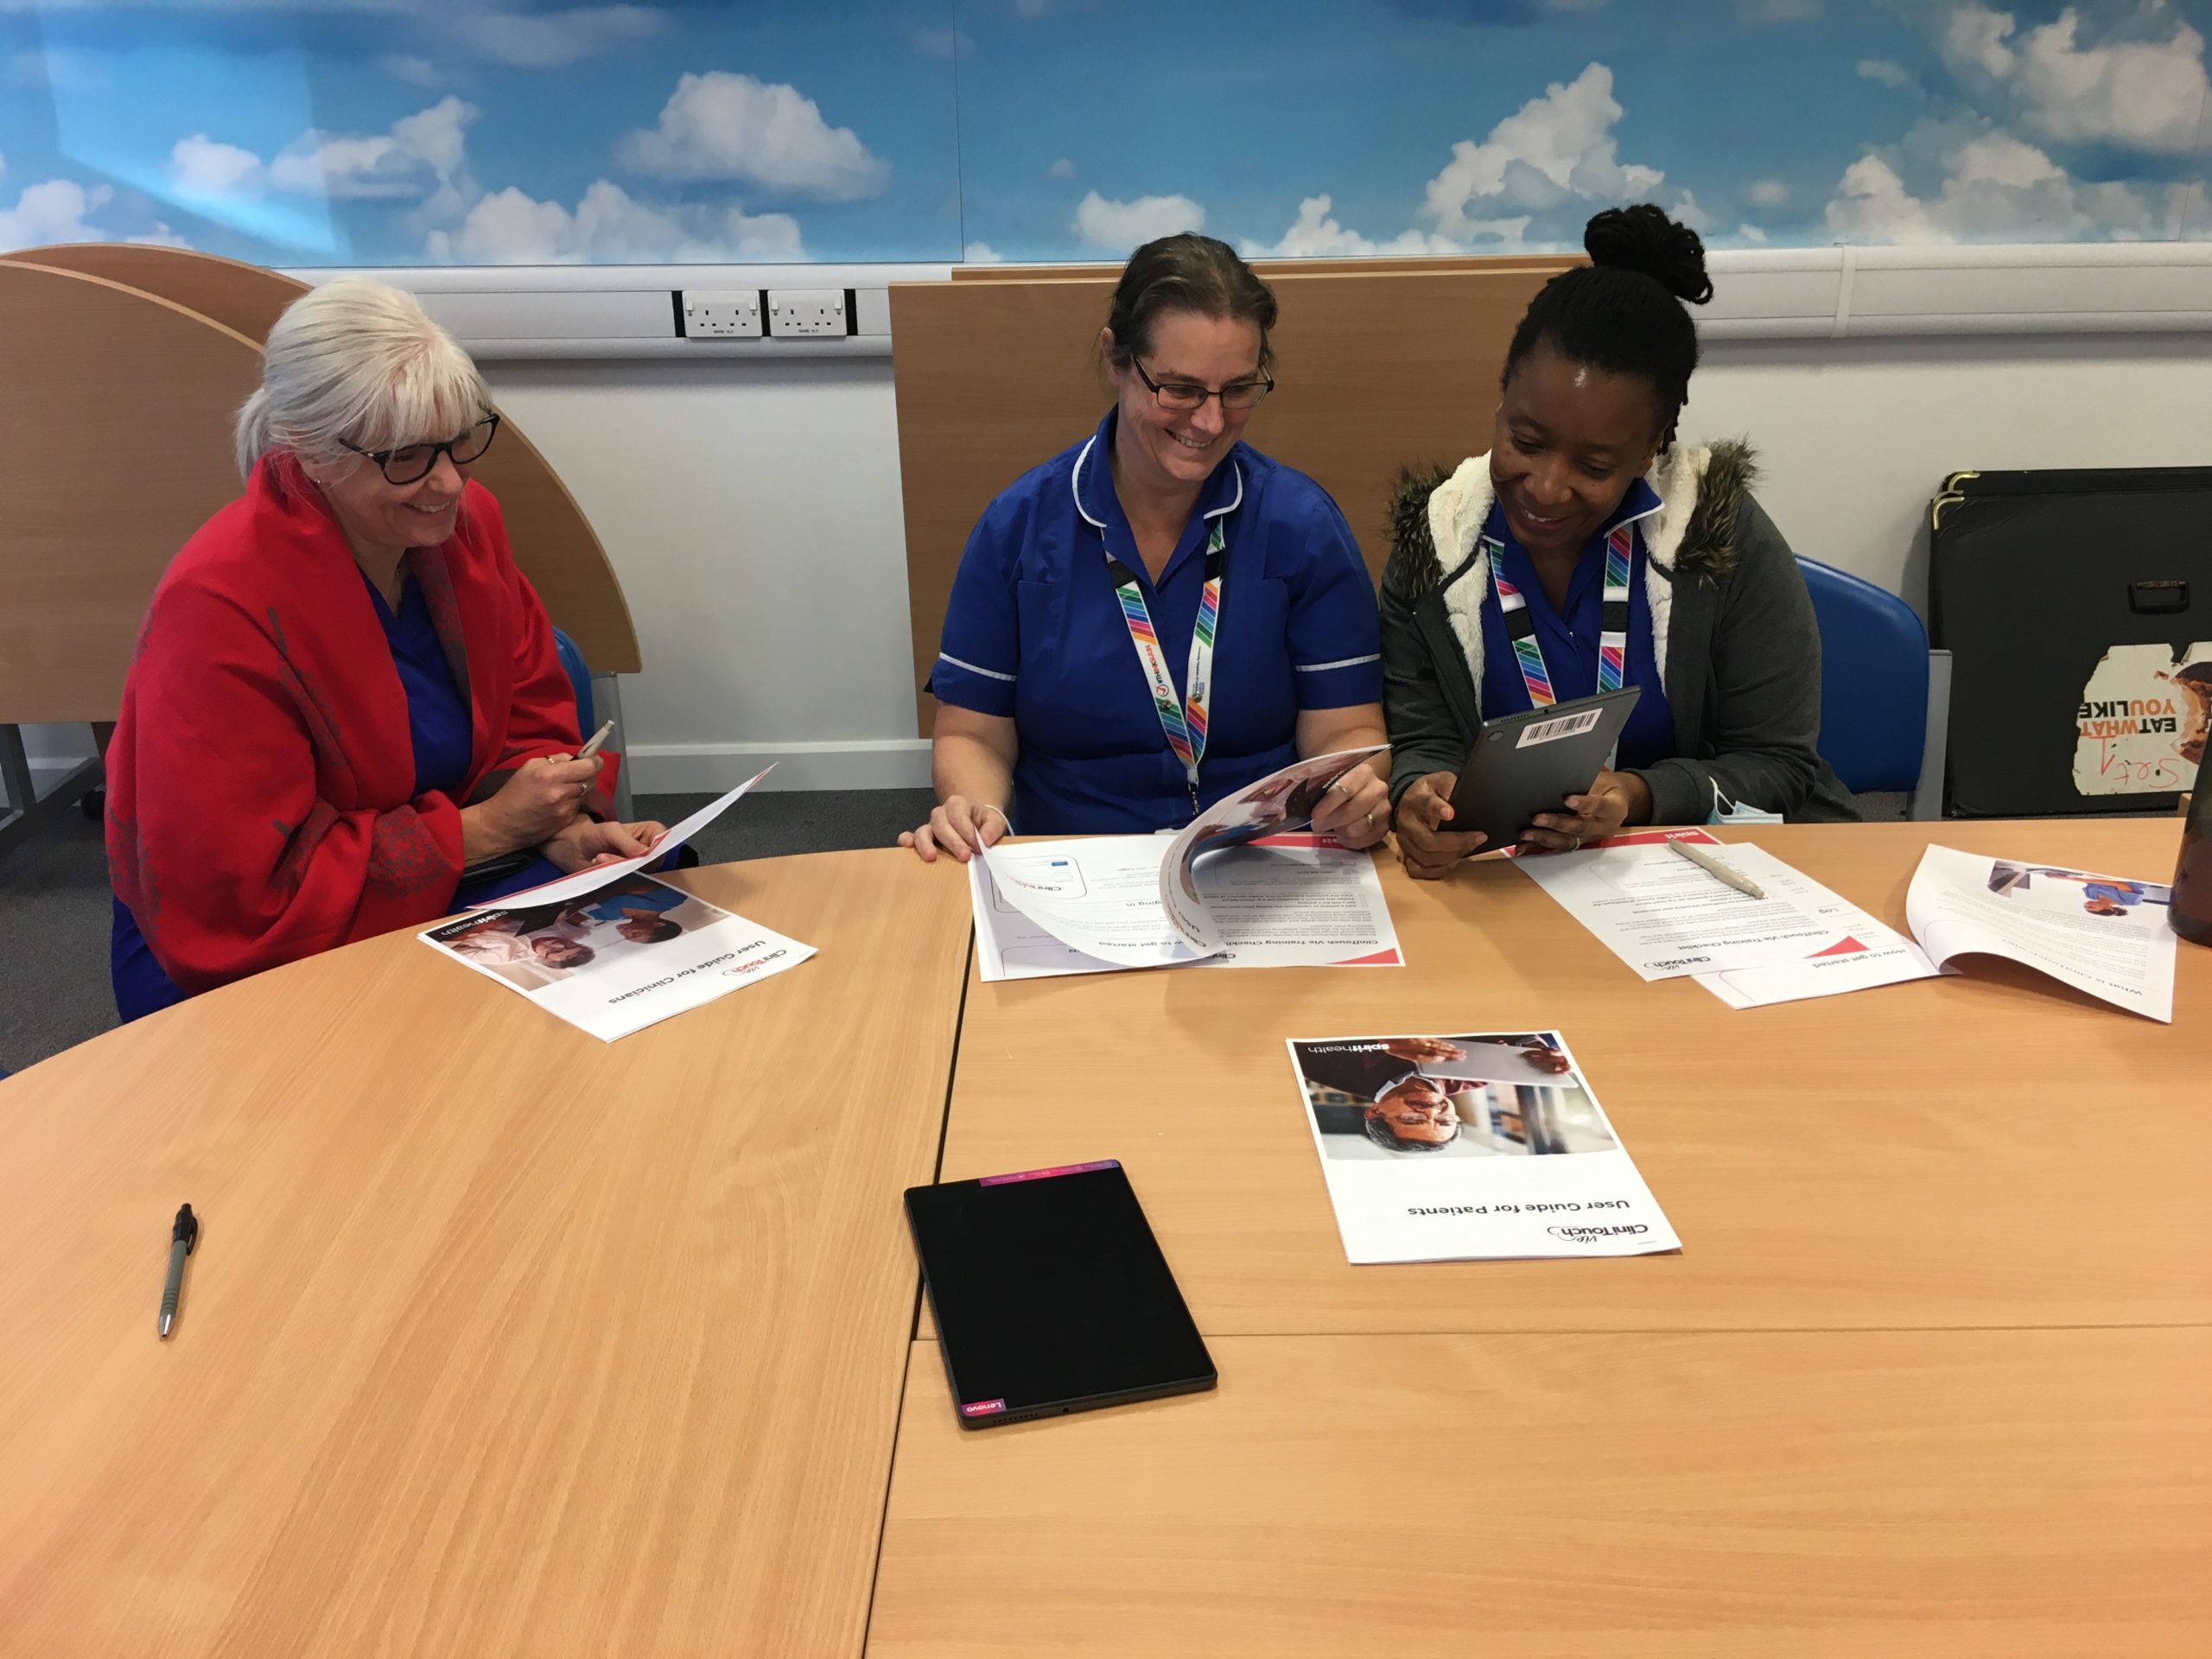 Three nurses sat at a table reviewing Clinitouch documents